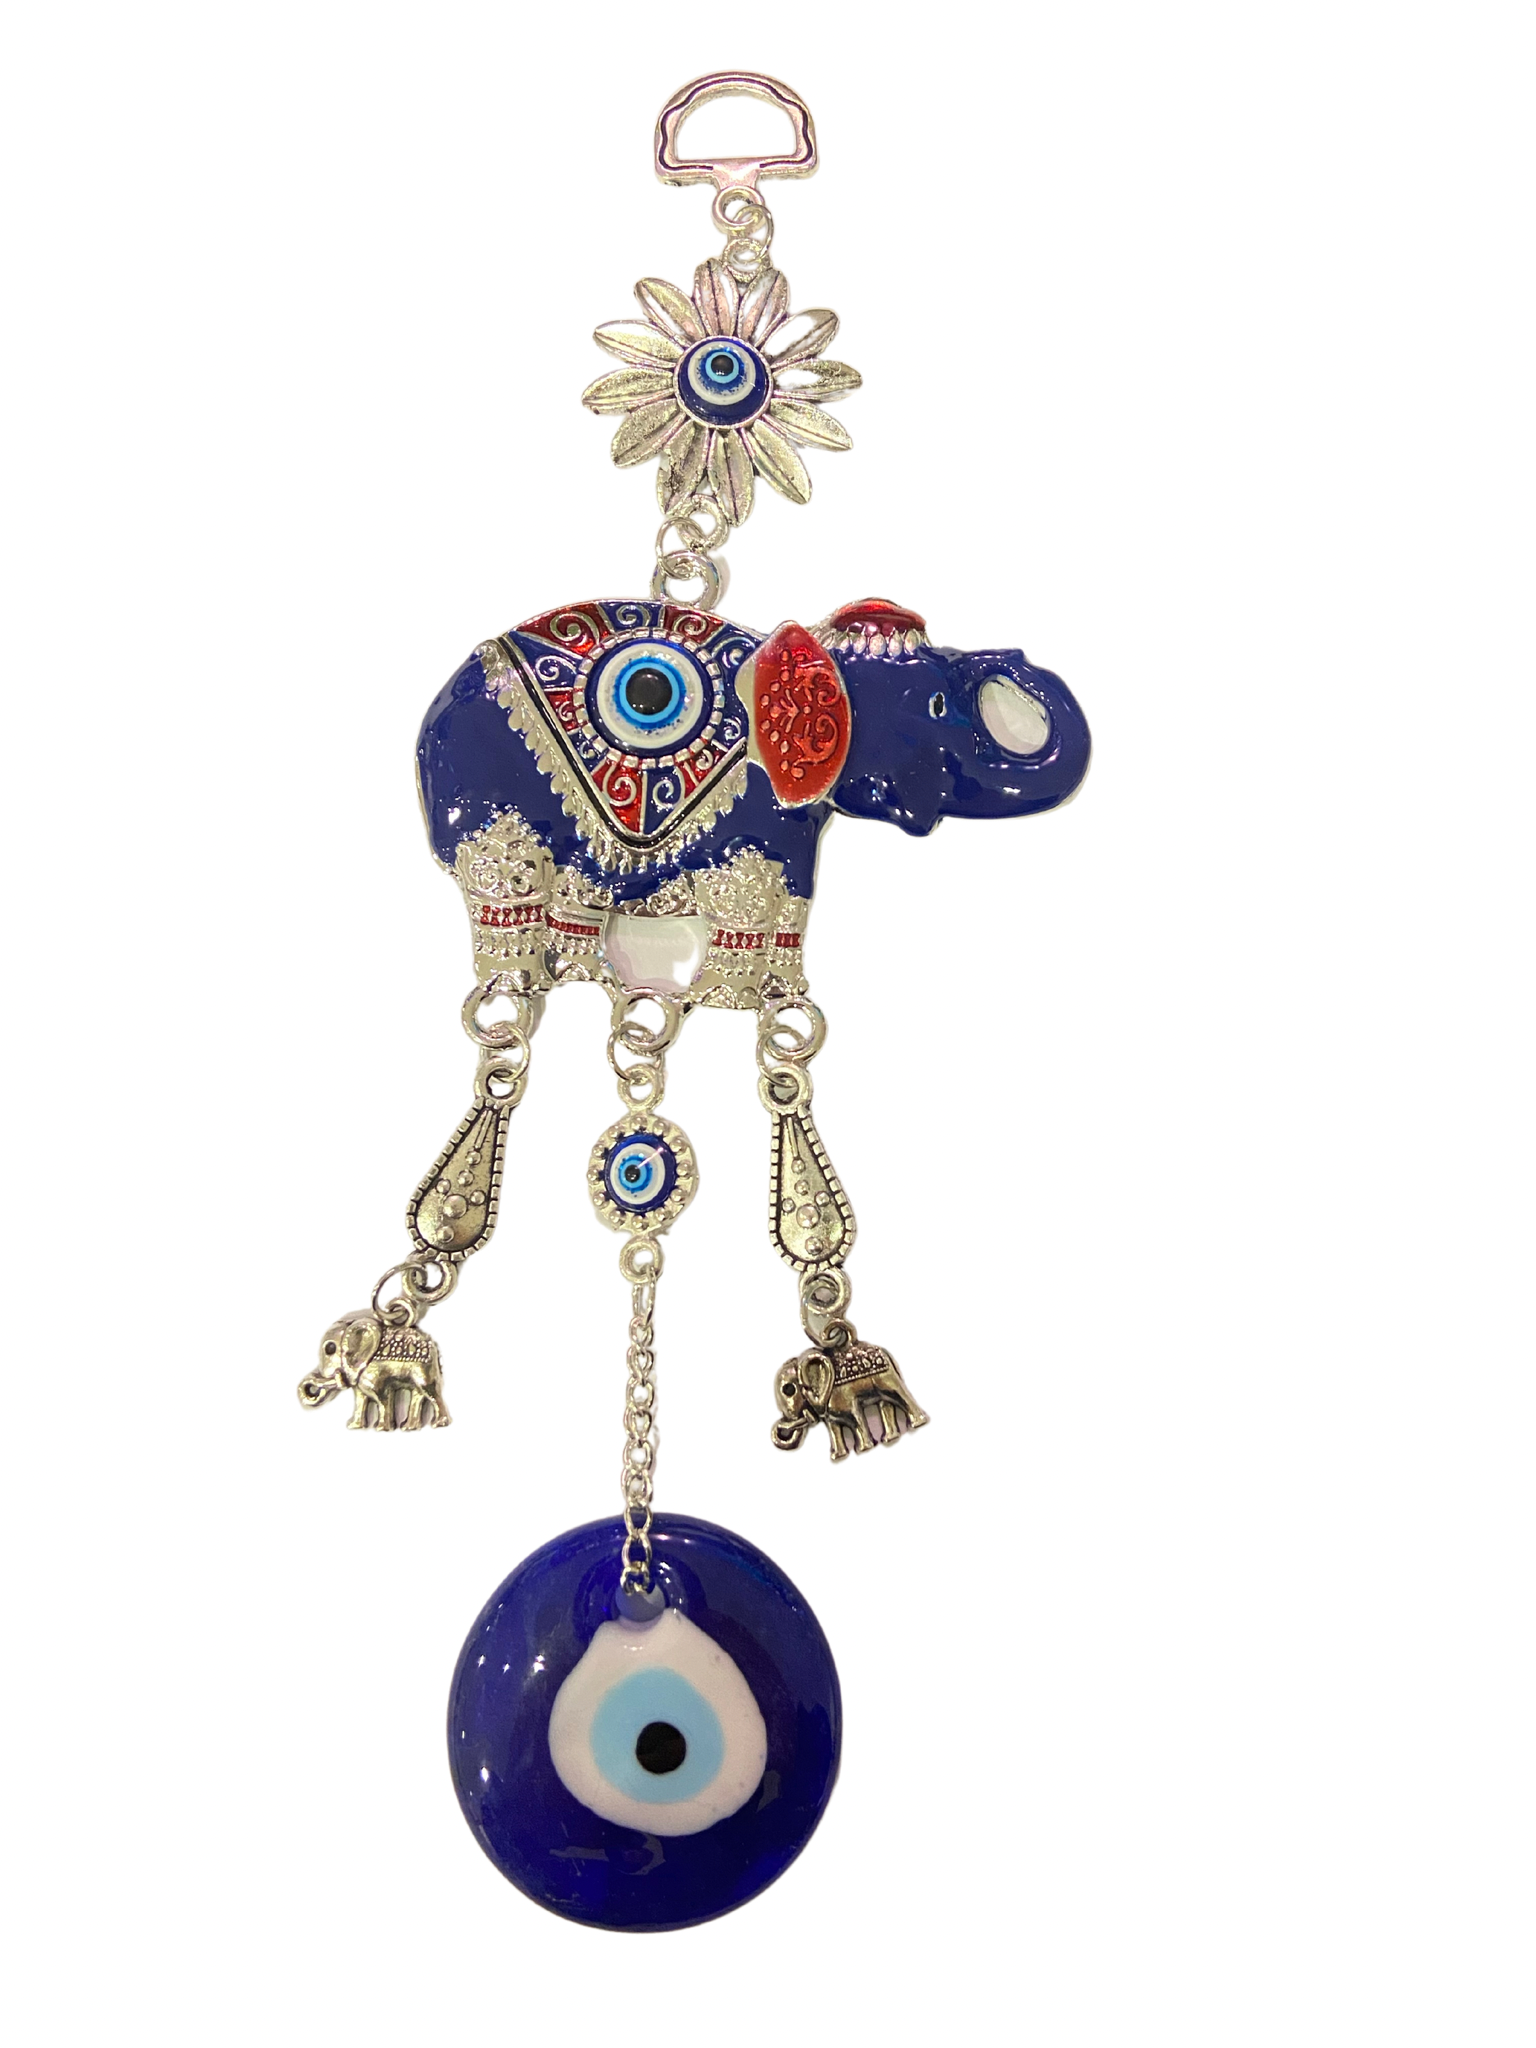 Red and blue Elephant evil eye